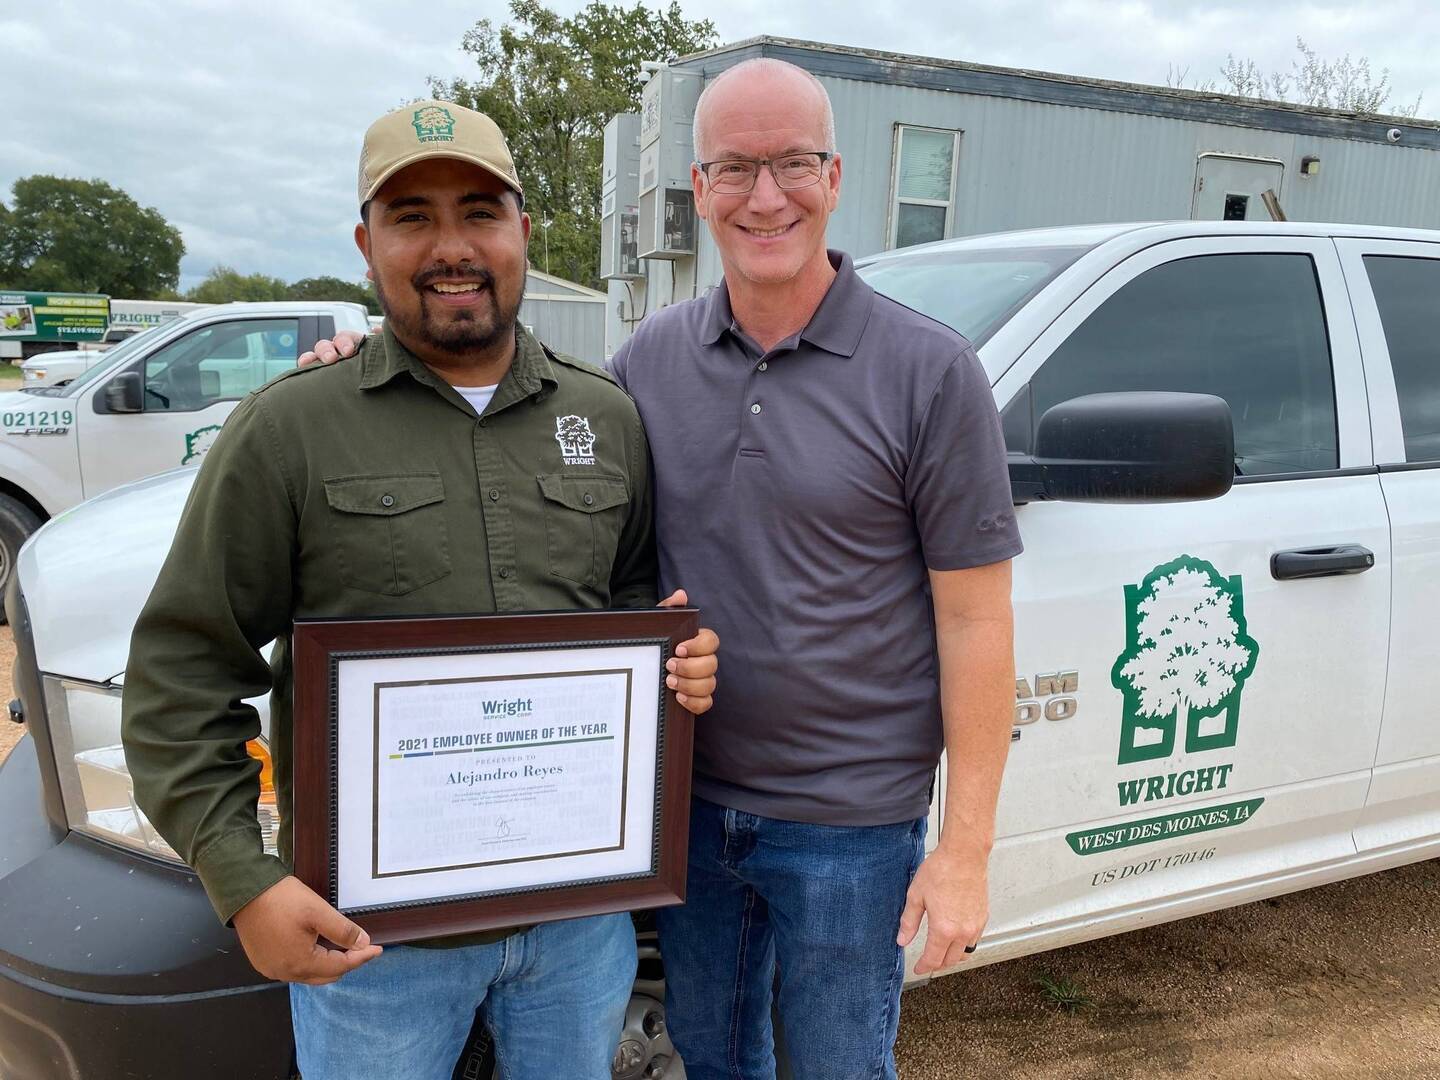 2021 Employee Owner of the Year Alejandro Reyes and Division Manager Joe Partridge